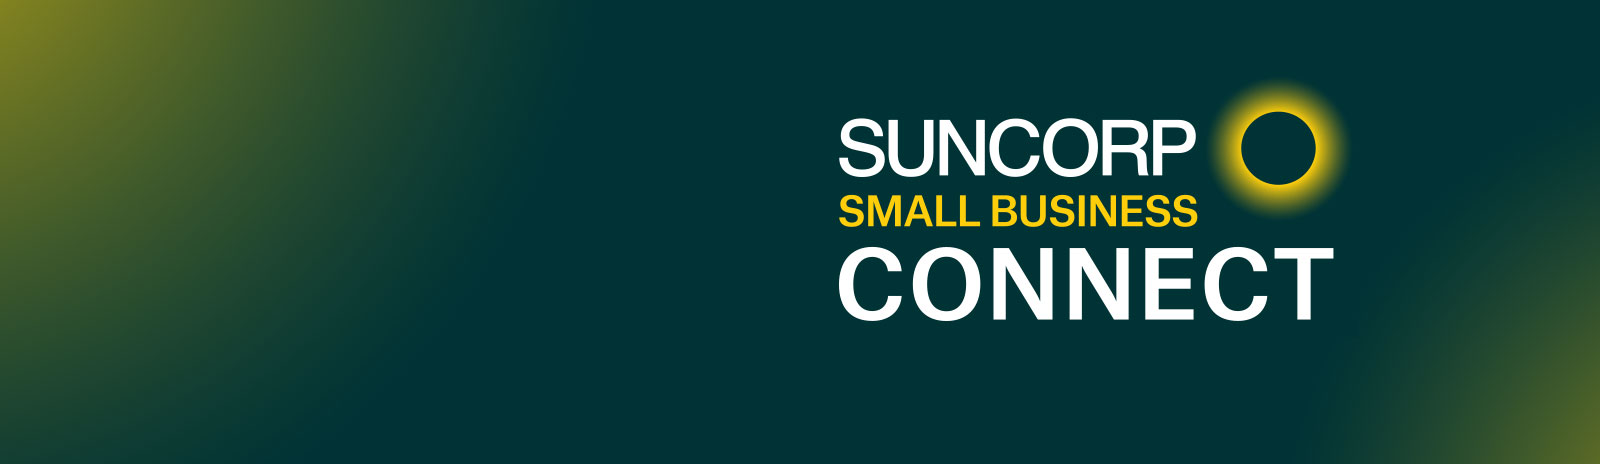 Suncorp small business connect